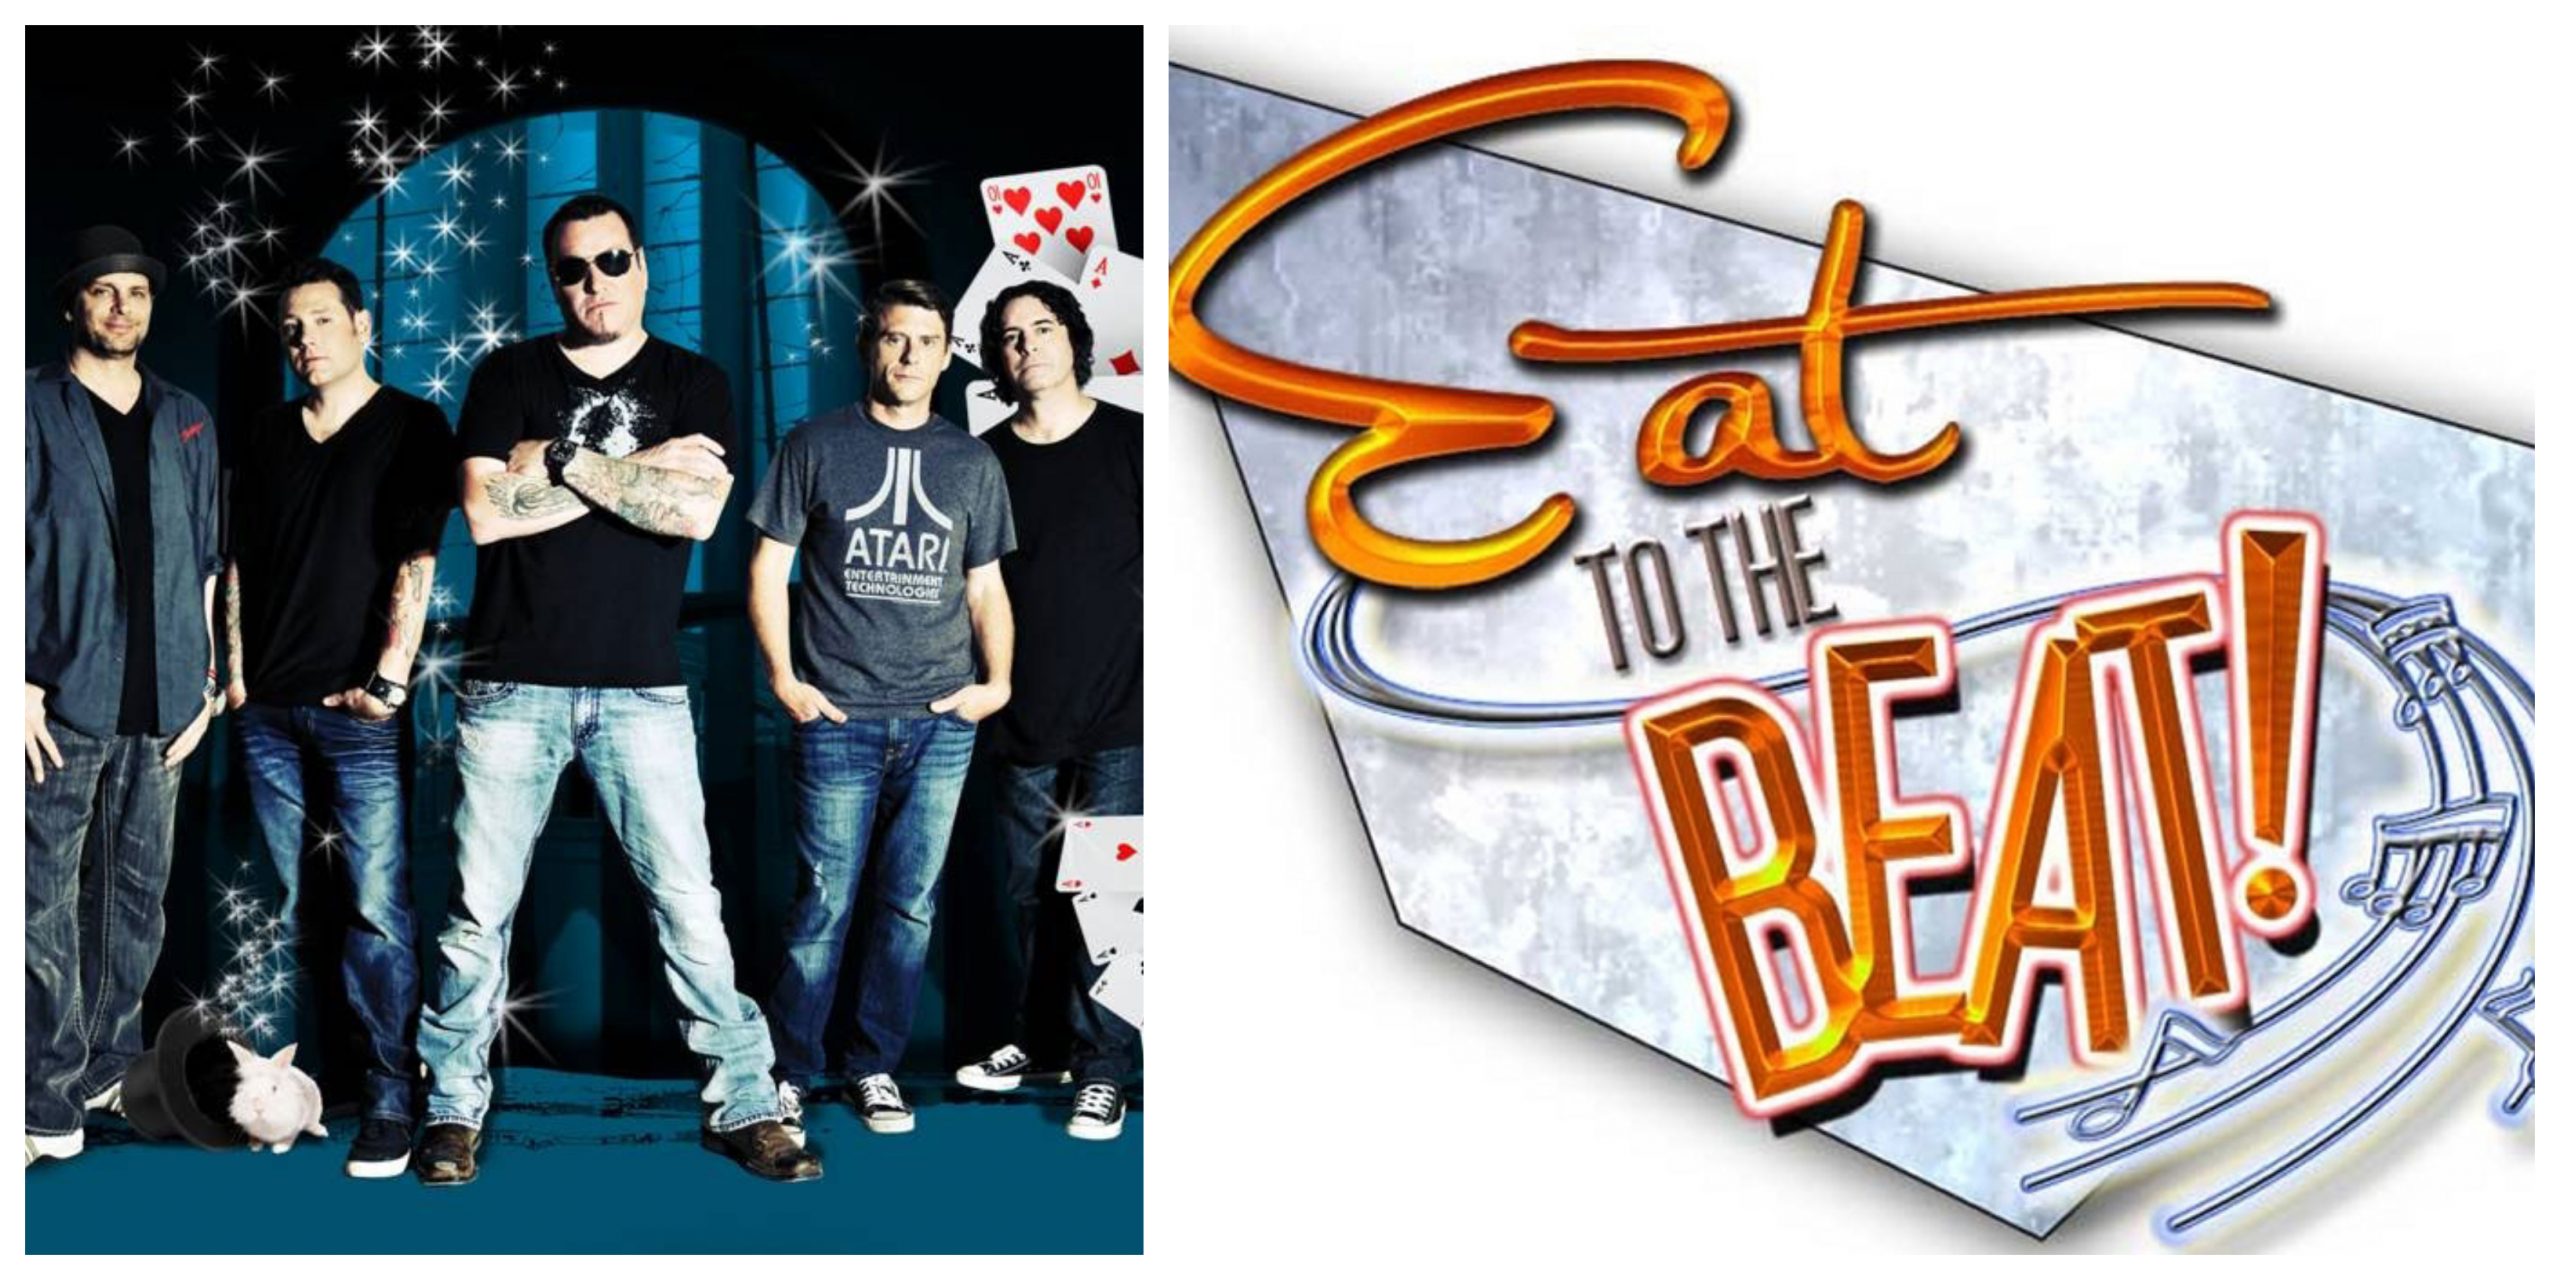 Epcot’s Eat to the Beat Concerts for 2020 have been Canceled